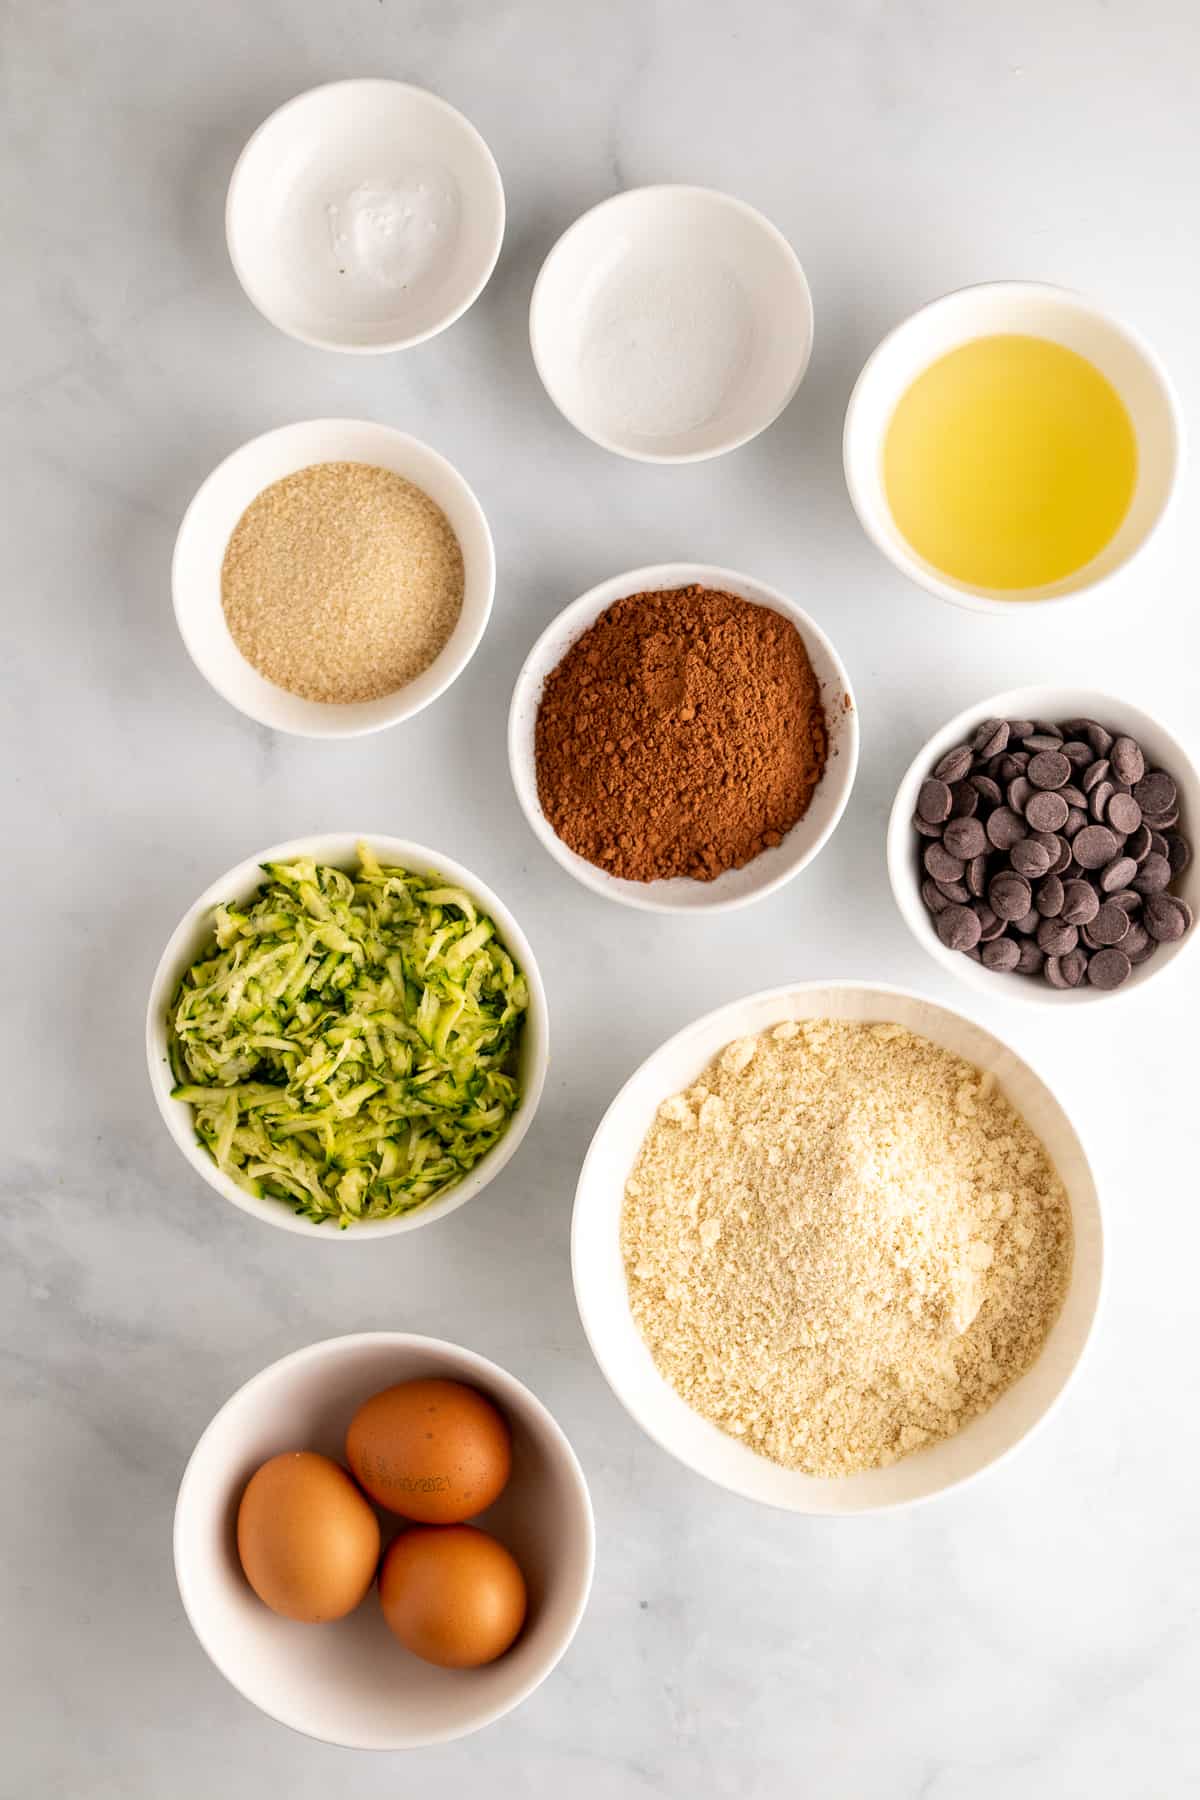 Muffin ingredients in separate bowls and ramekins, as seen from above